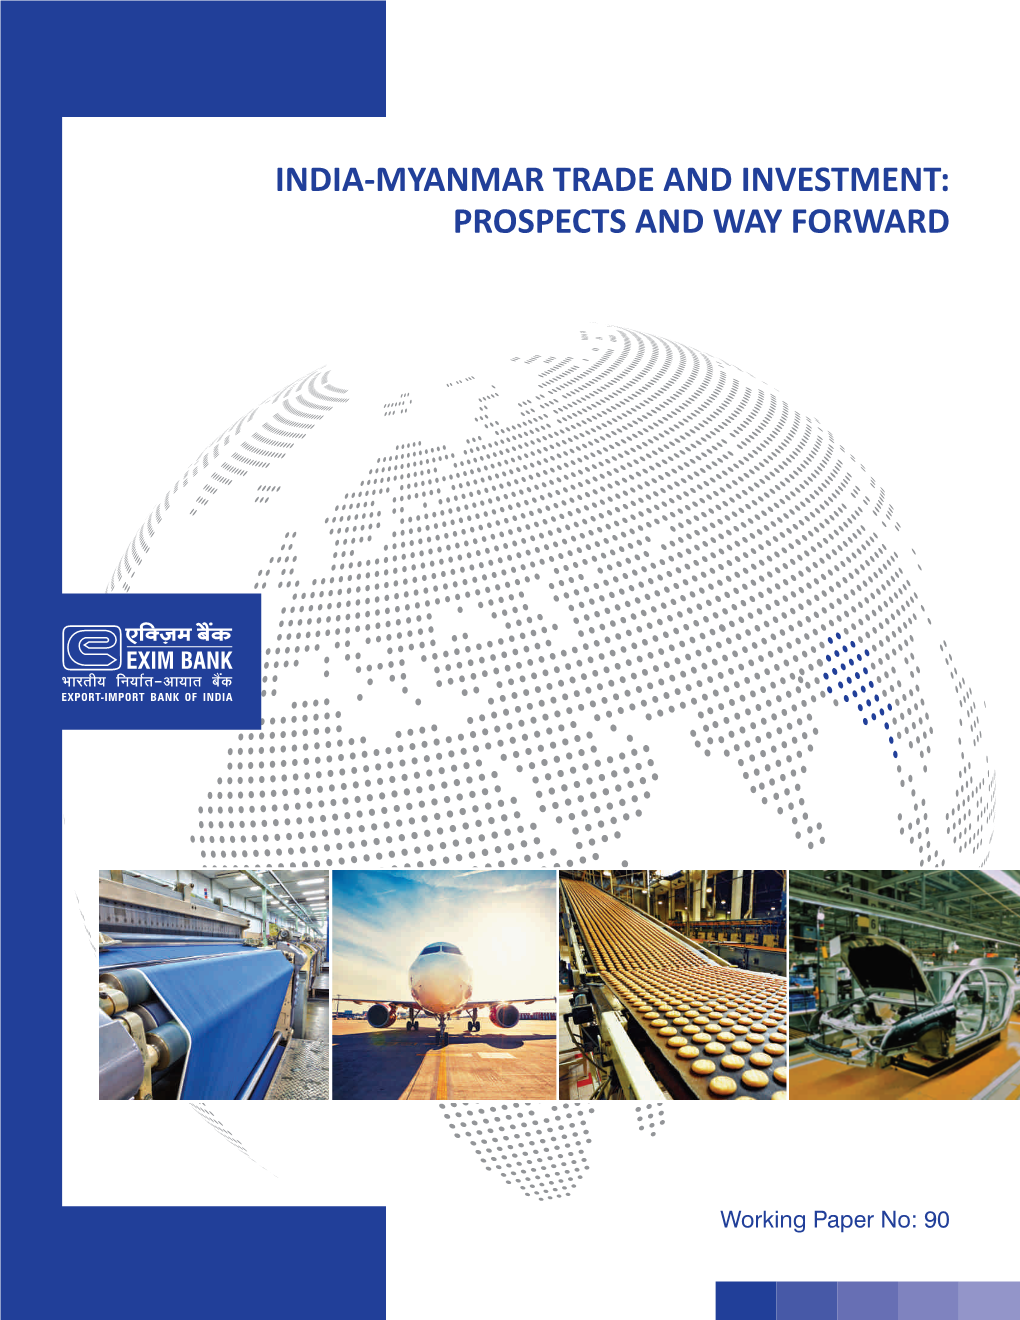 Myanmar Trade and Investment Relations 31 4